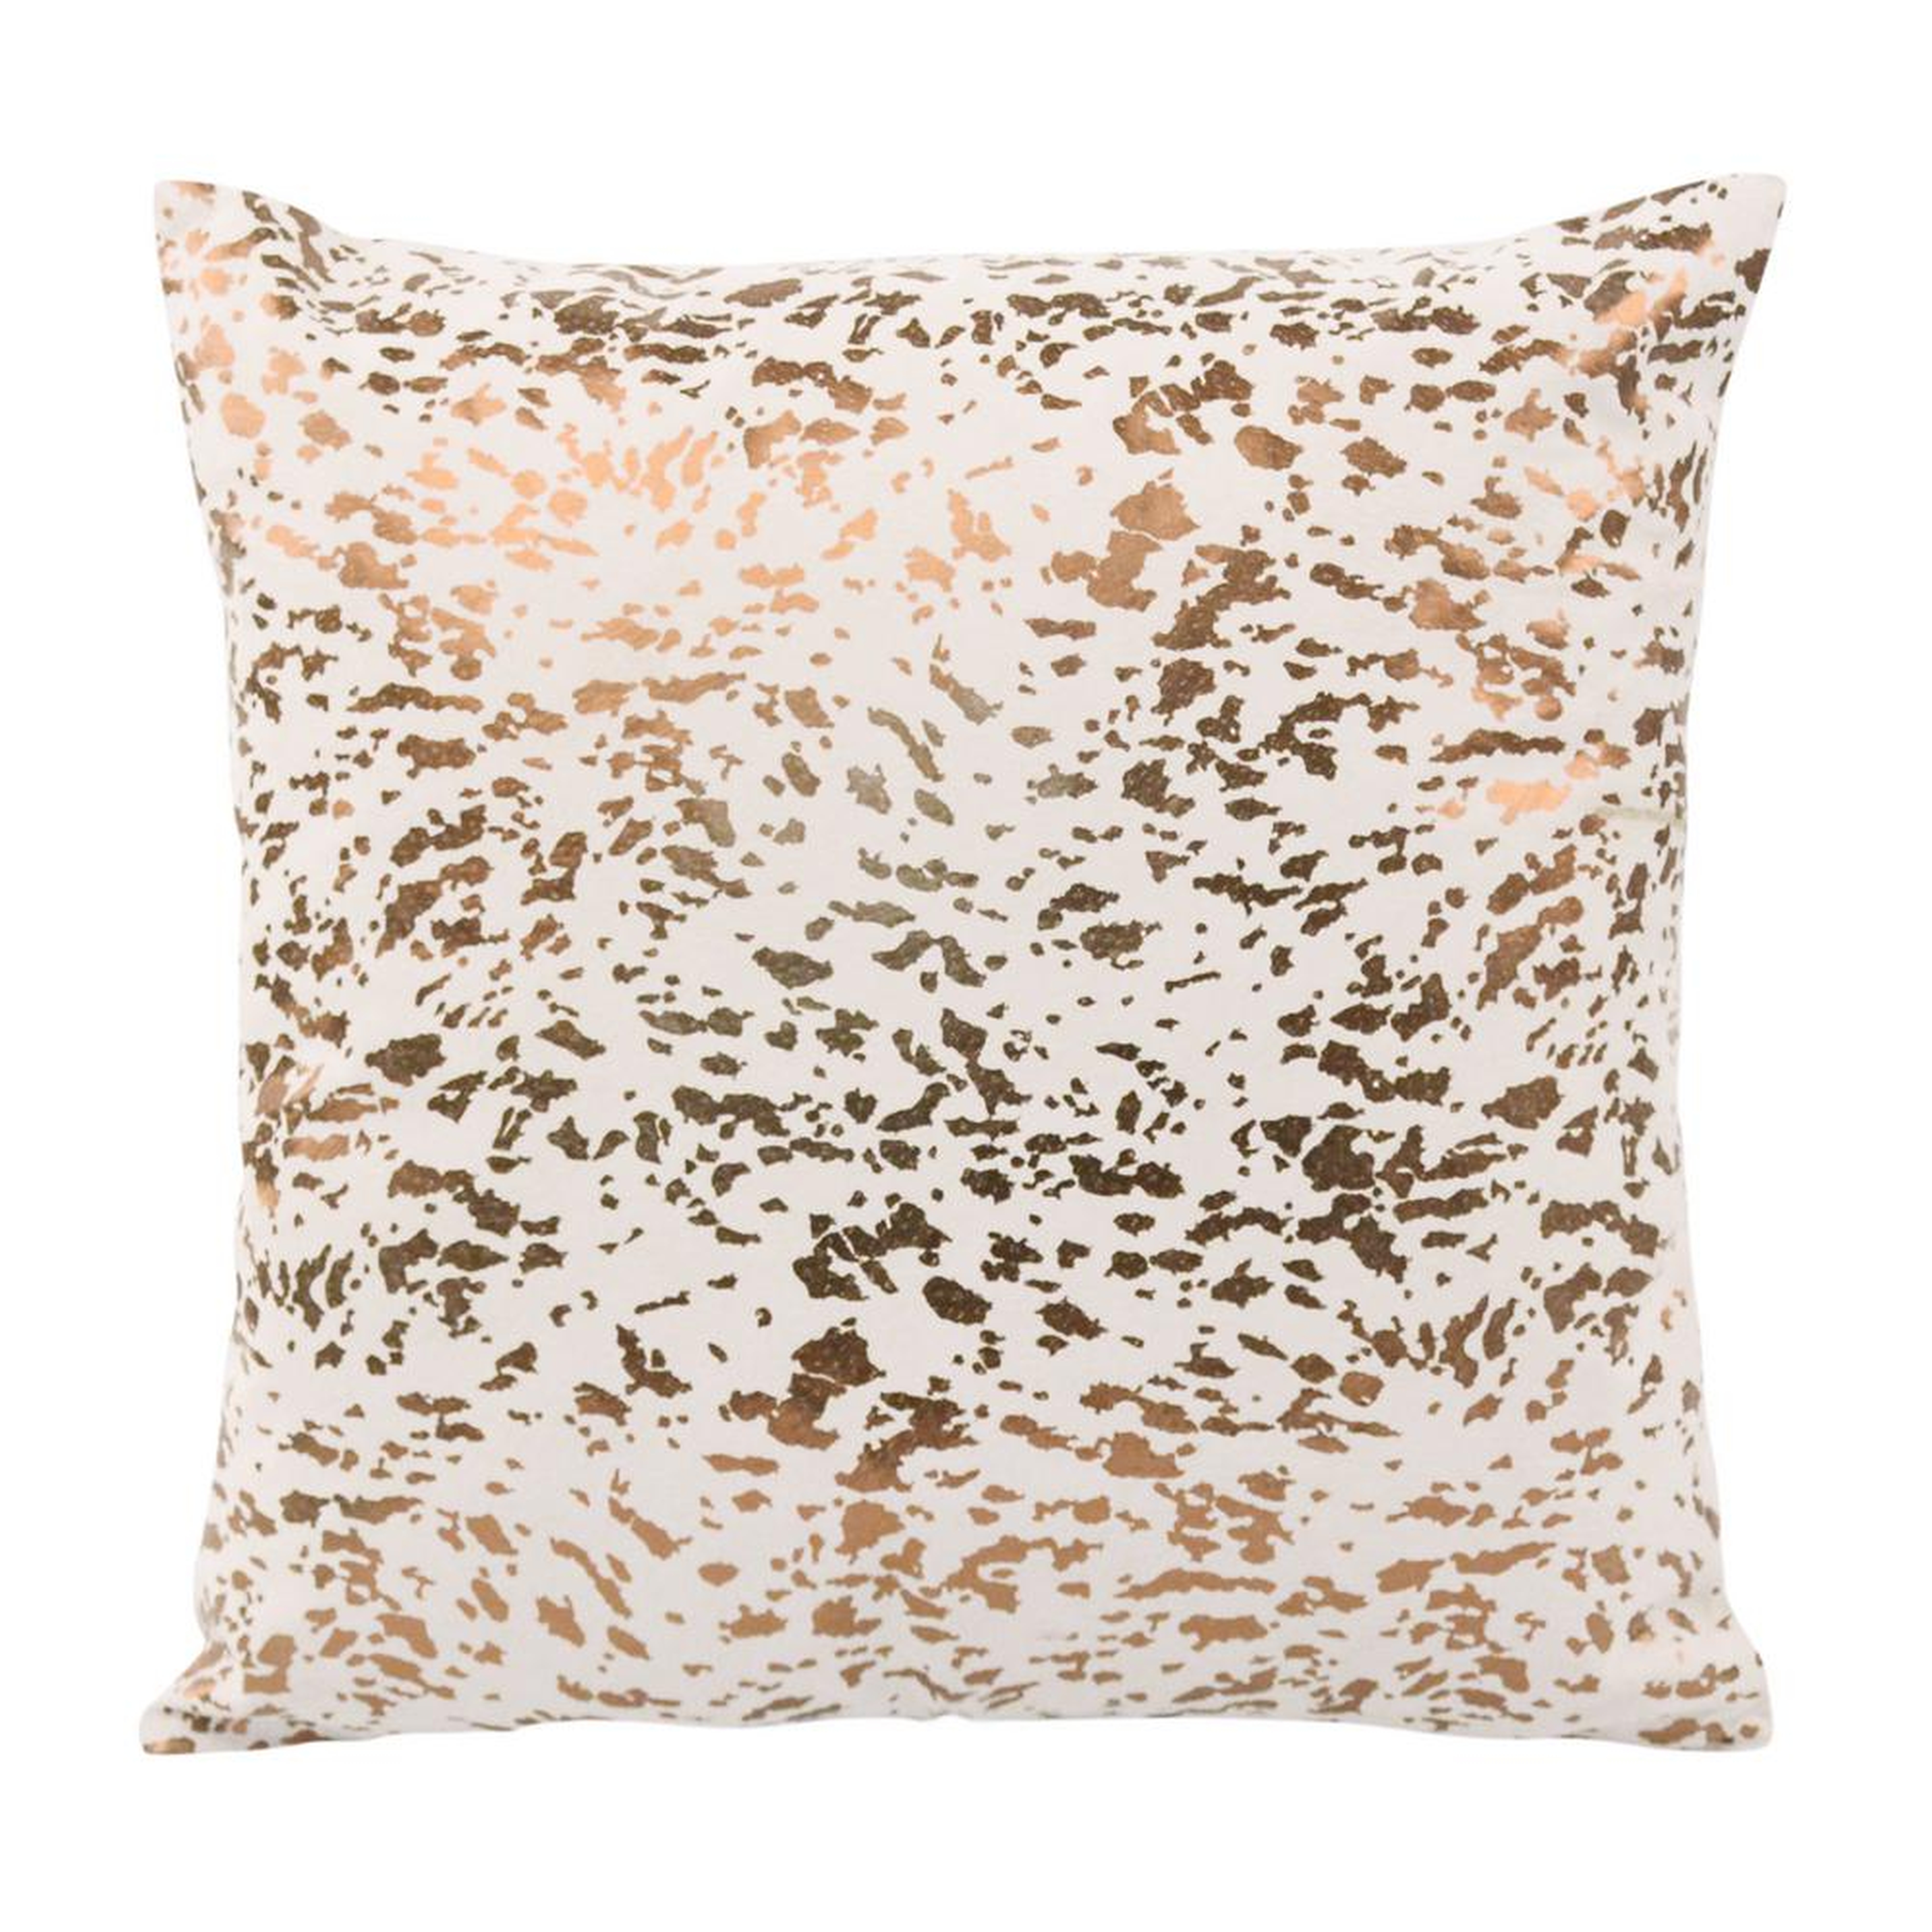 Joanna Speckled Cream and Lilly Throw Pillow - Maren Home